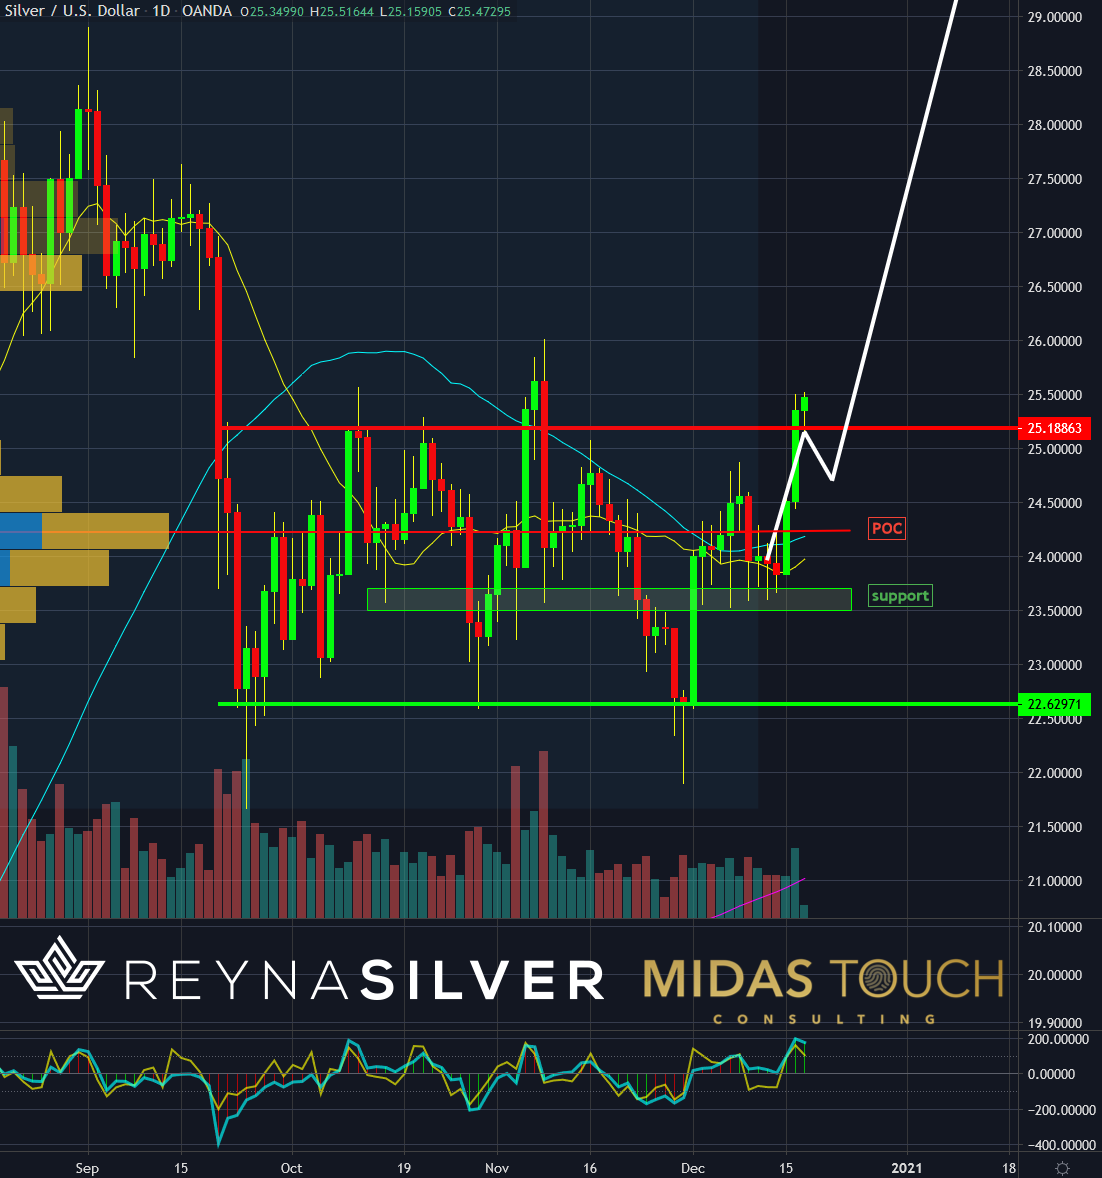 Silver in US Dollar, daily chart as of December 17th, 2020